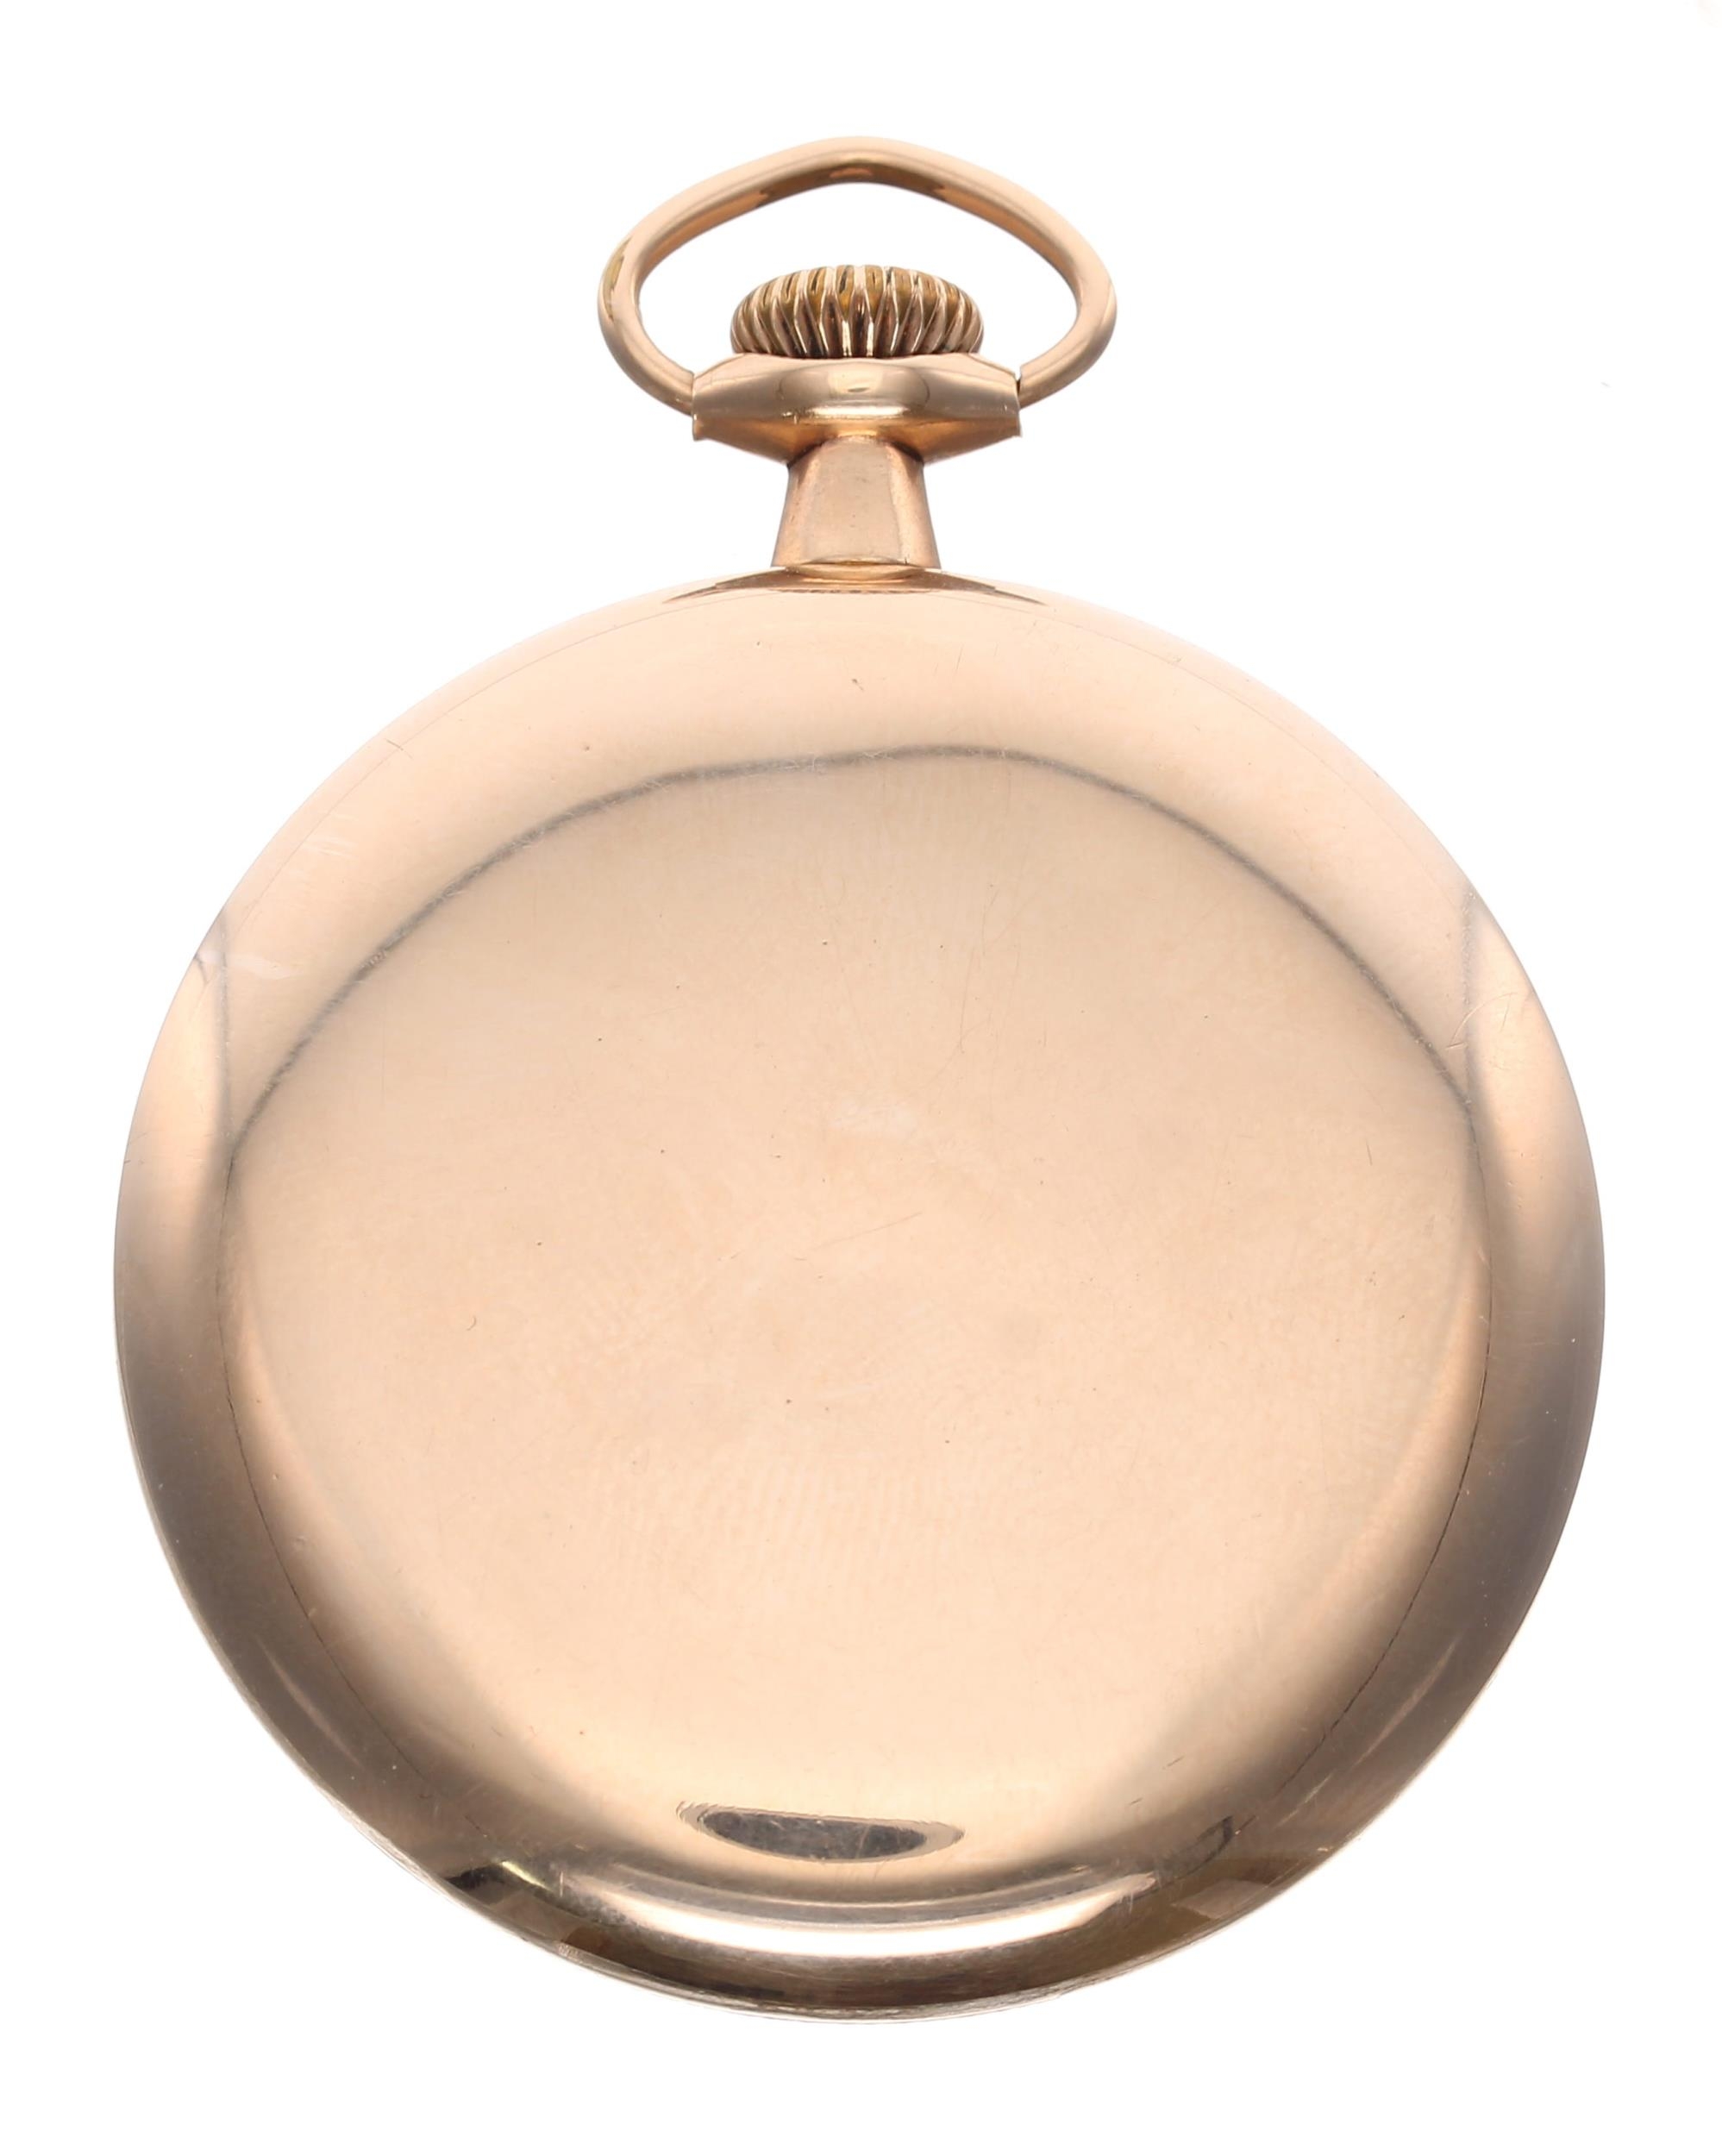 Elgin National Watch Co. 'B.W. Raymond' gold plated lever set pocket watch, circa 1910, signed 19 - Image 4 of 4